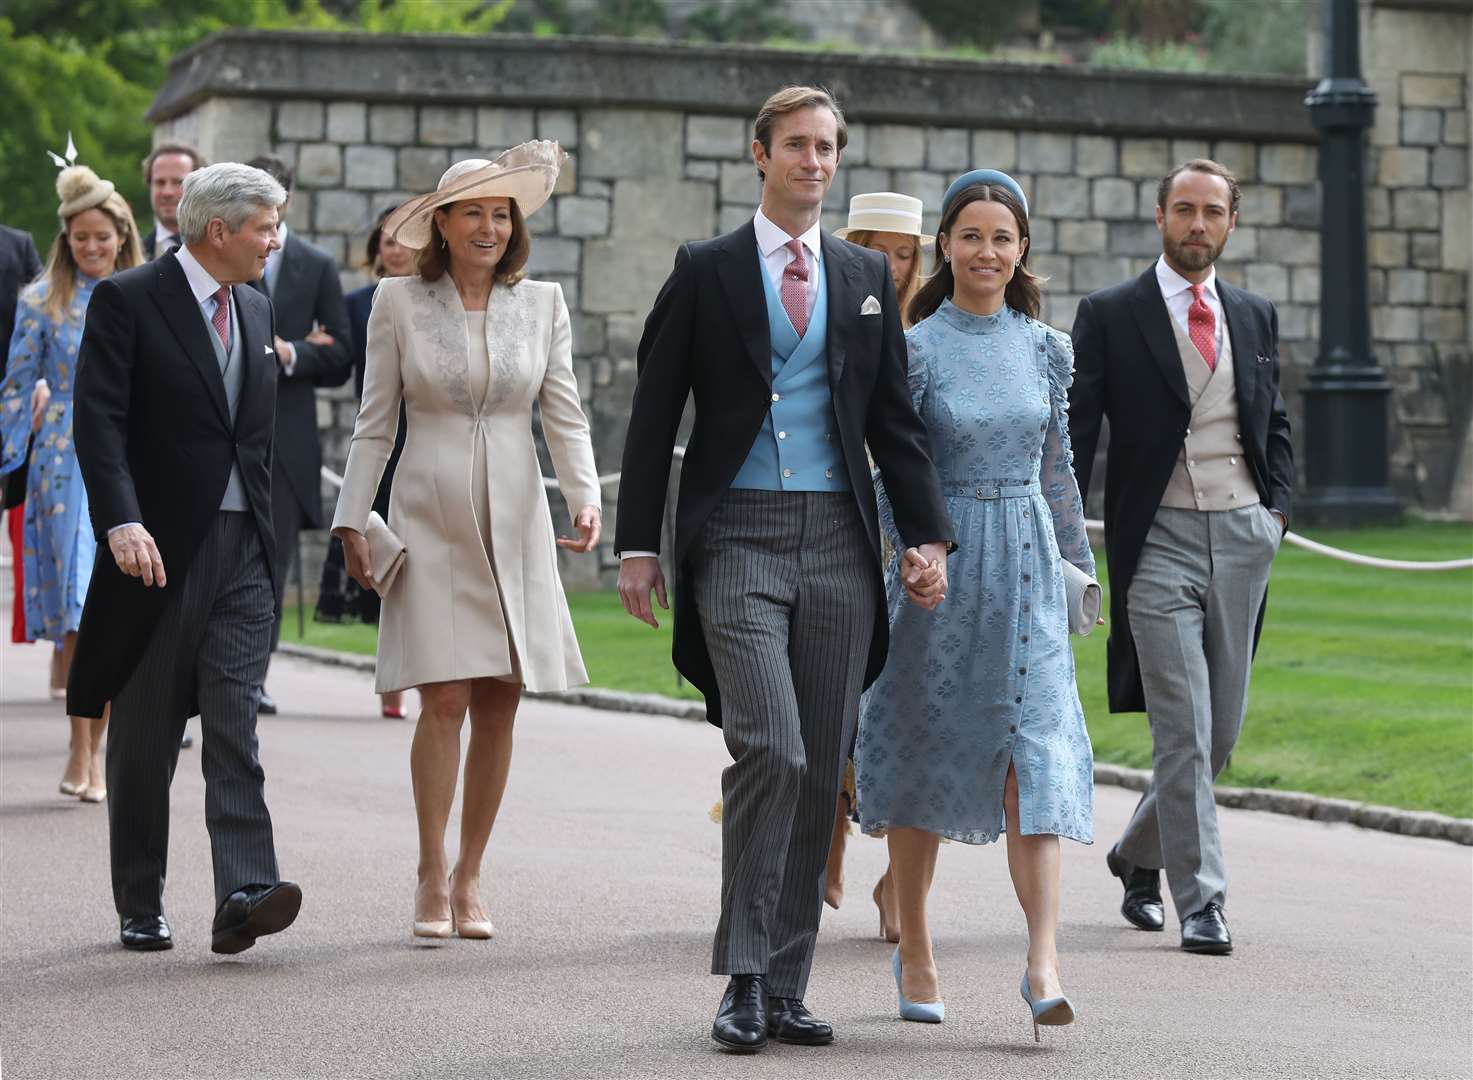 Michael and Carole Middleton, James and Pippa Matthews and James Middleton (Steve Parsons/PA)